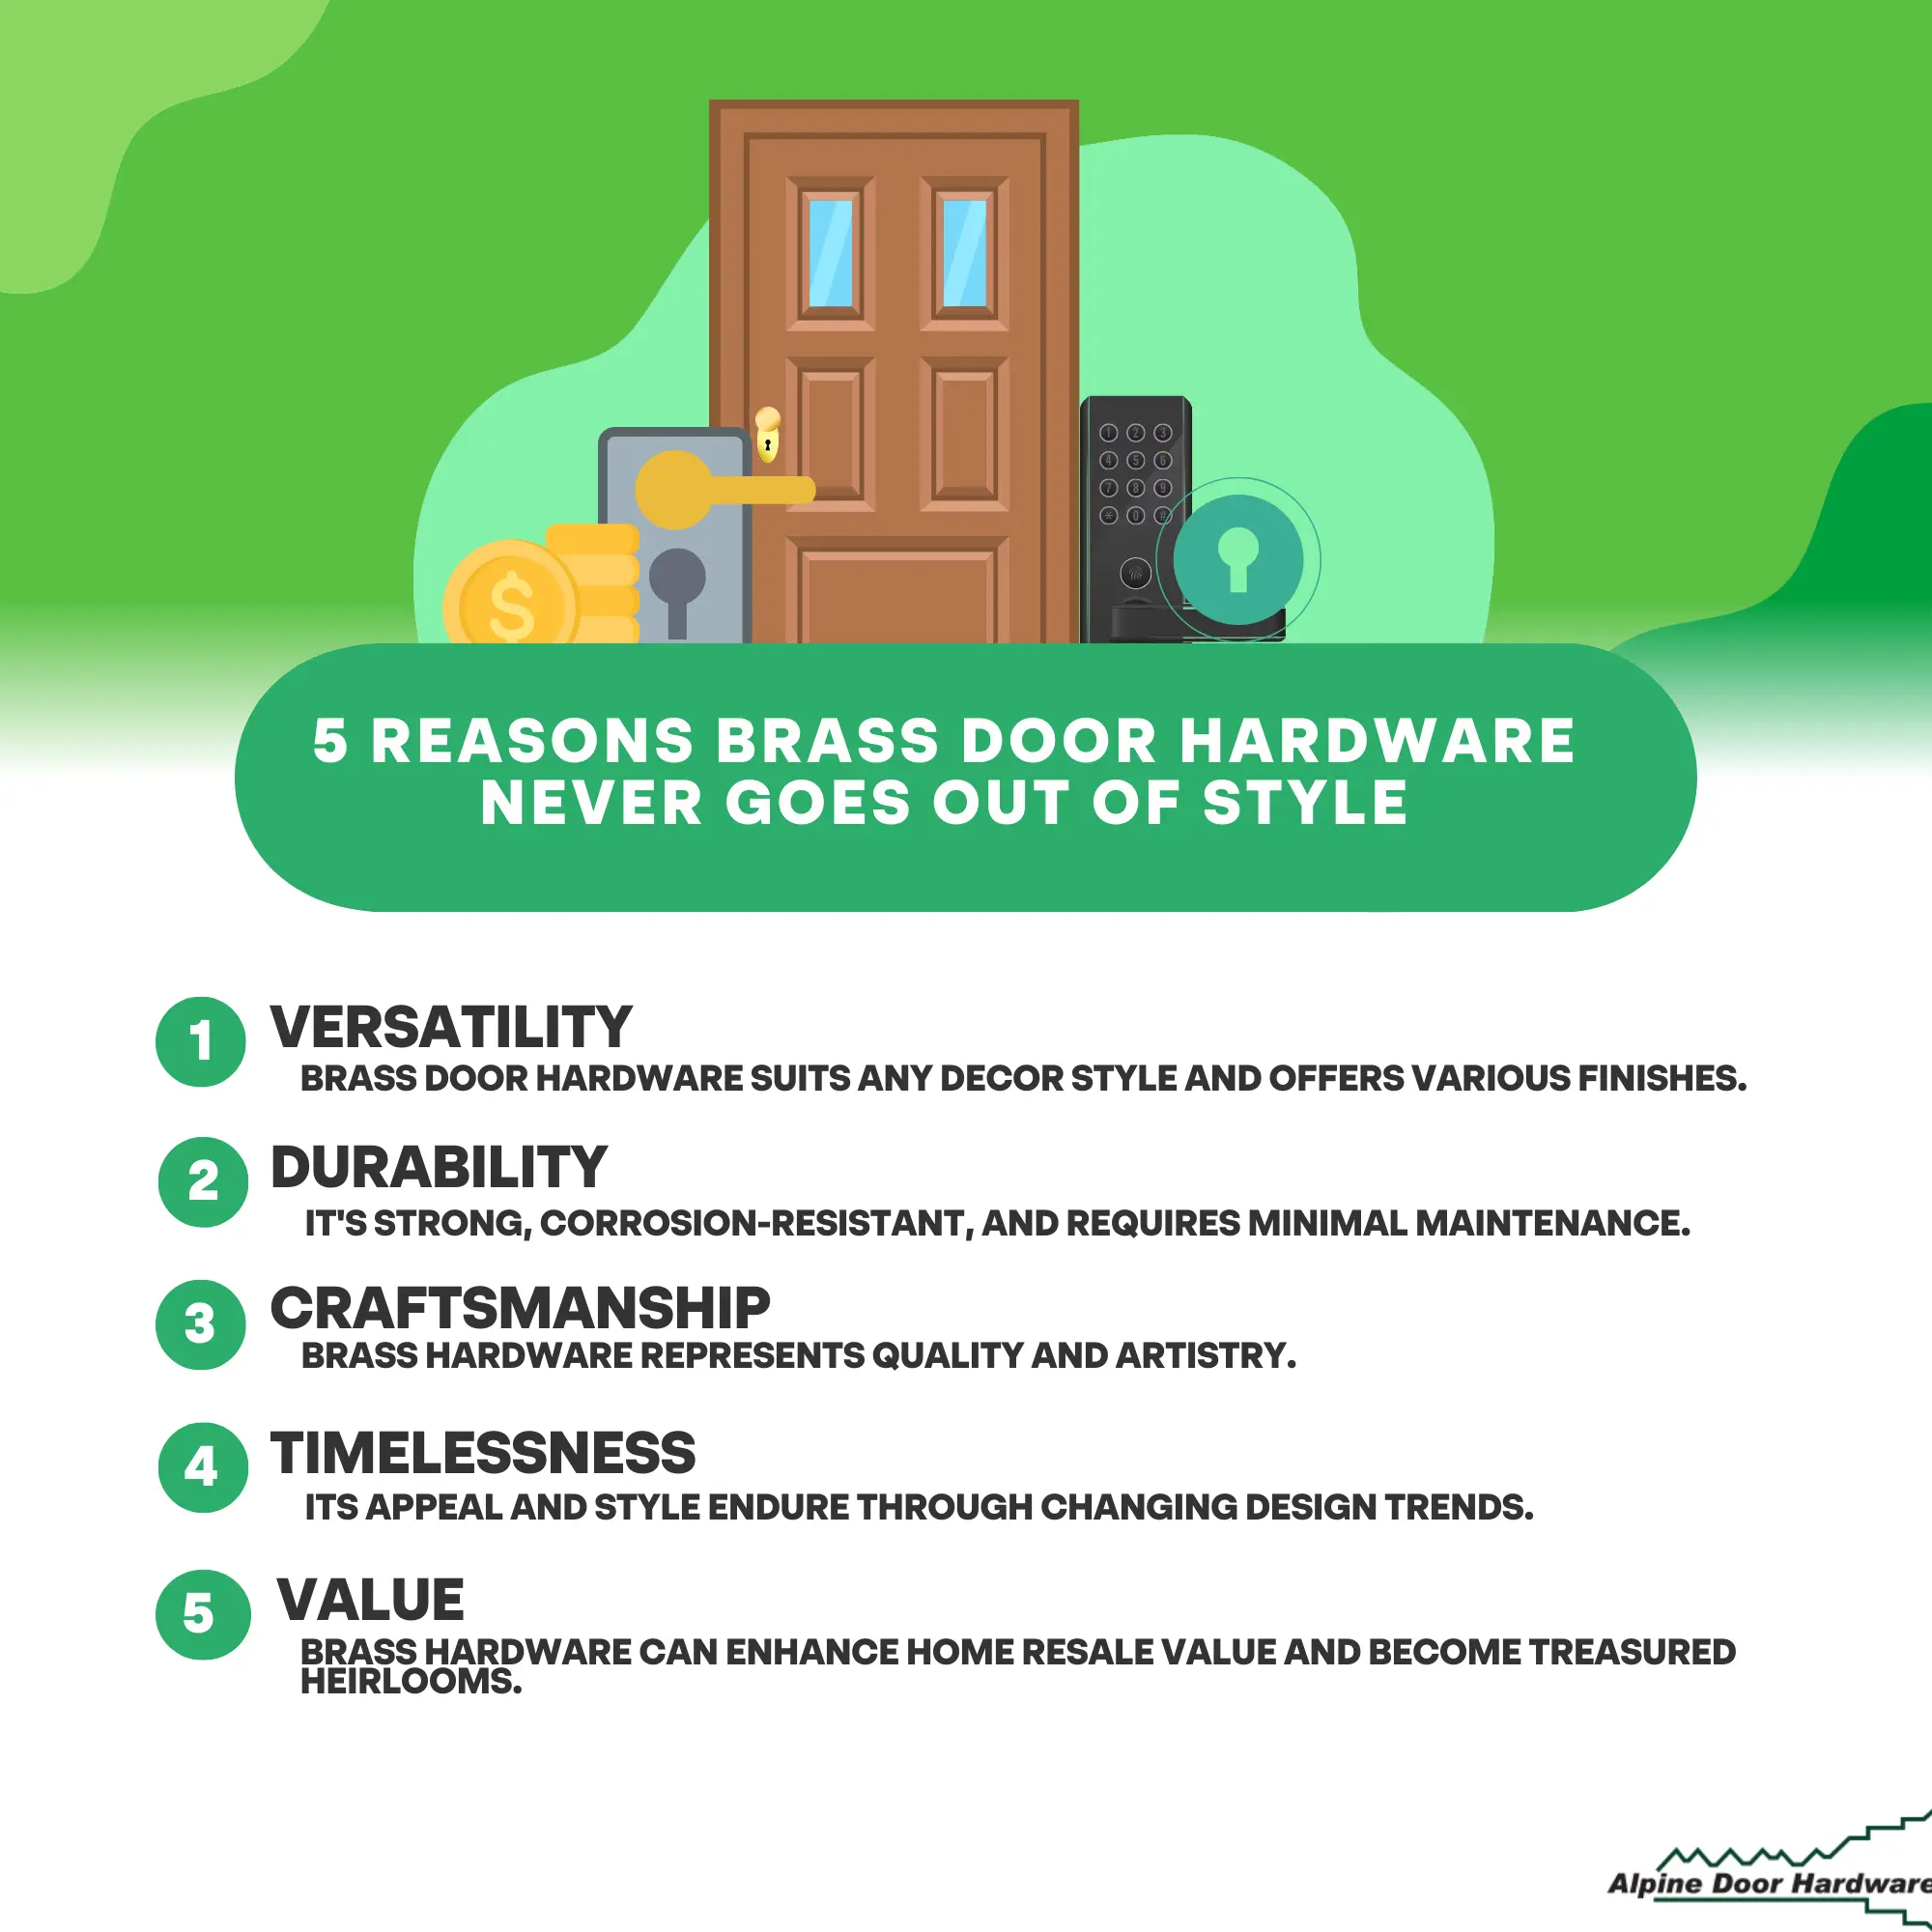 5 Reasons Brass Door Hardware Never Goes Out of Style